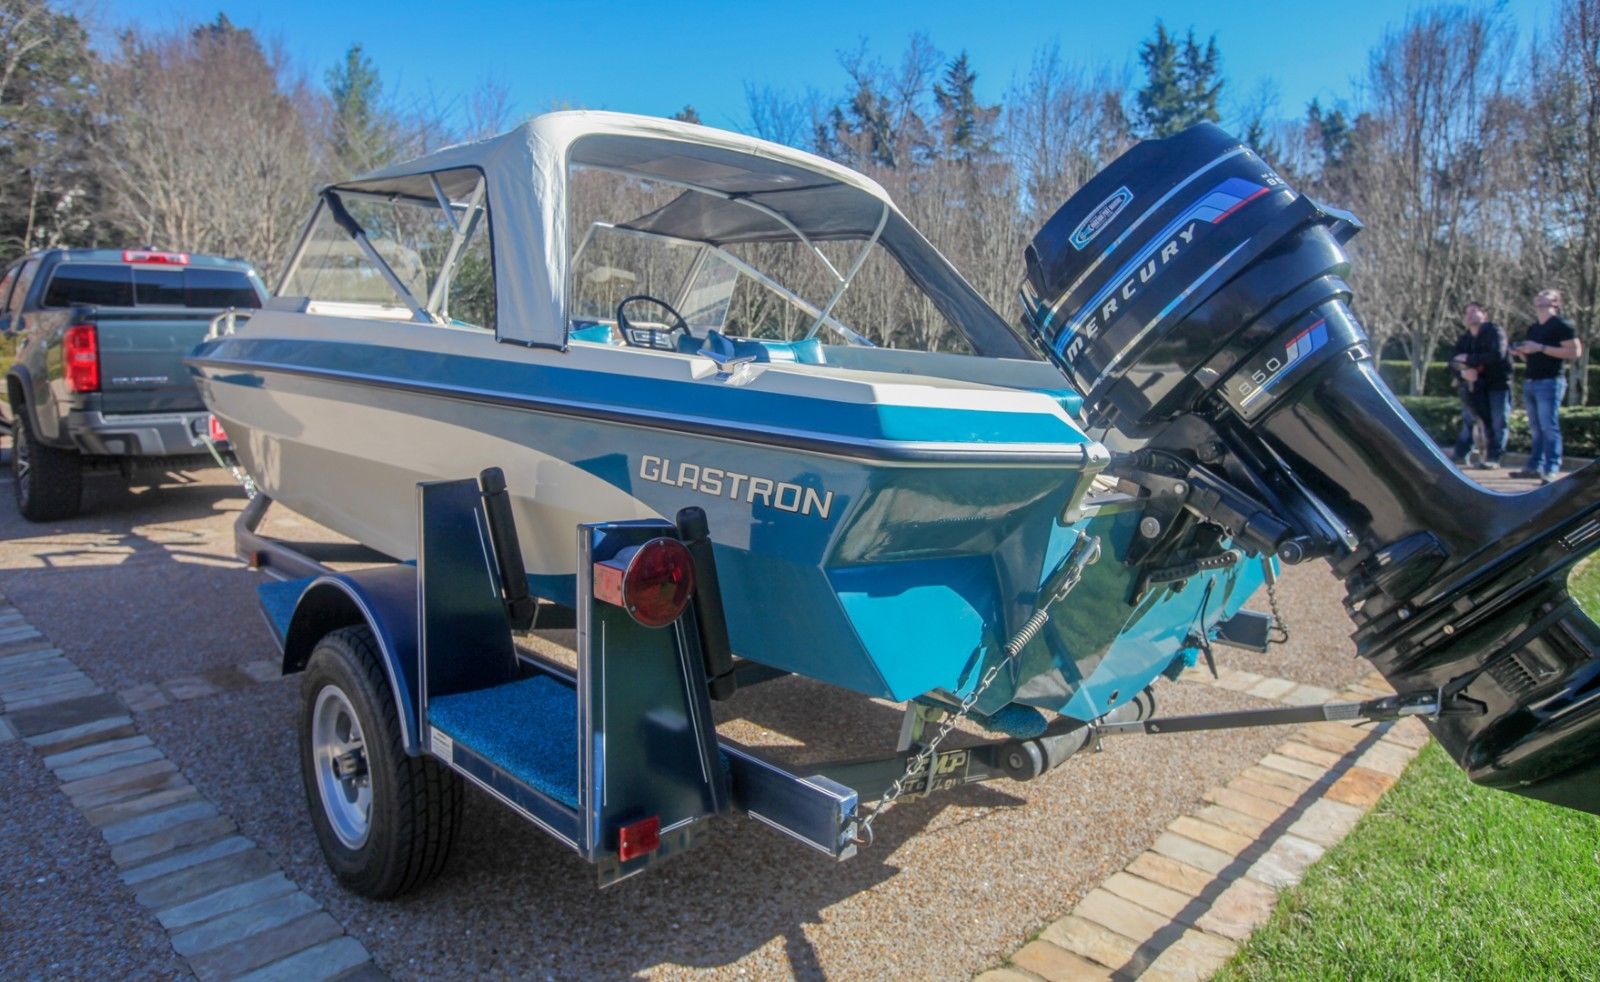 Glastron T166 Sportster 1977 for sale for $1,000 - Boats 